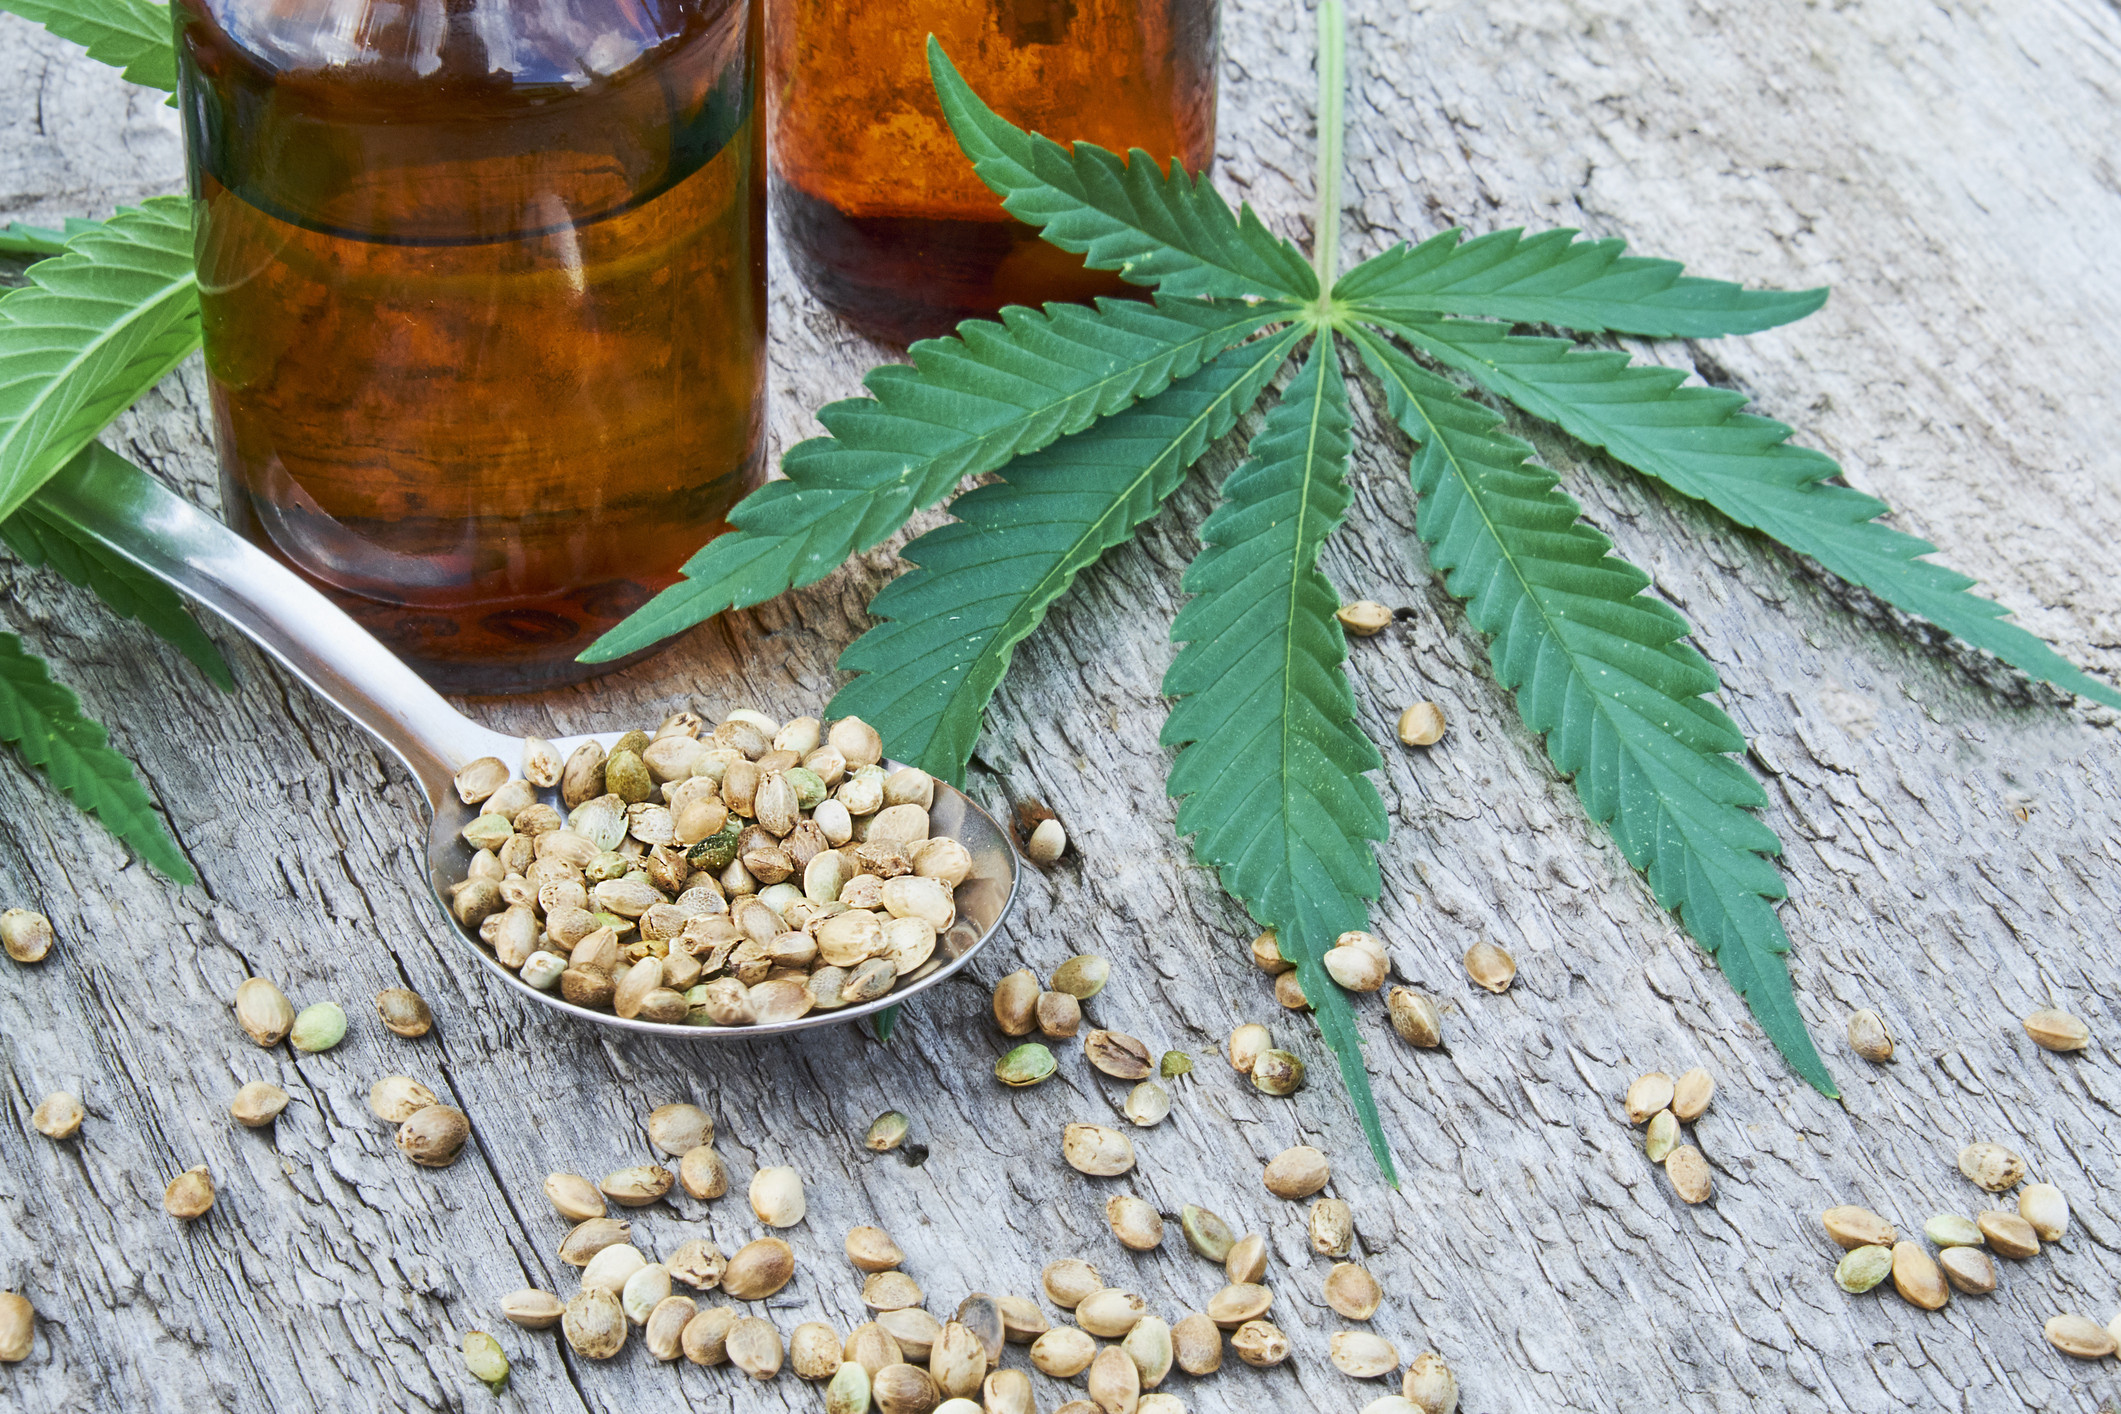 The Side Effects of Cannabidiol (CBD): What You Need to Know